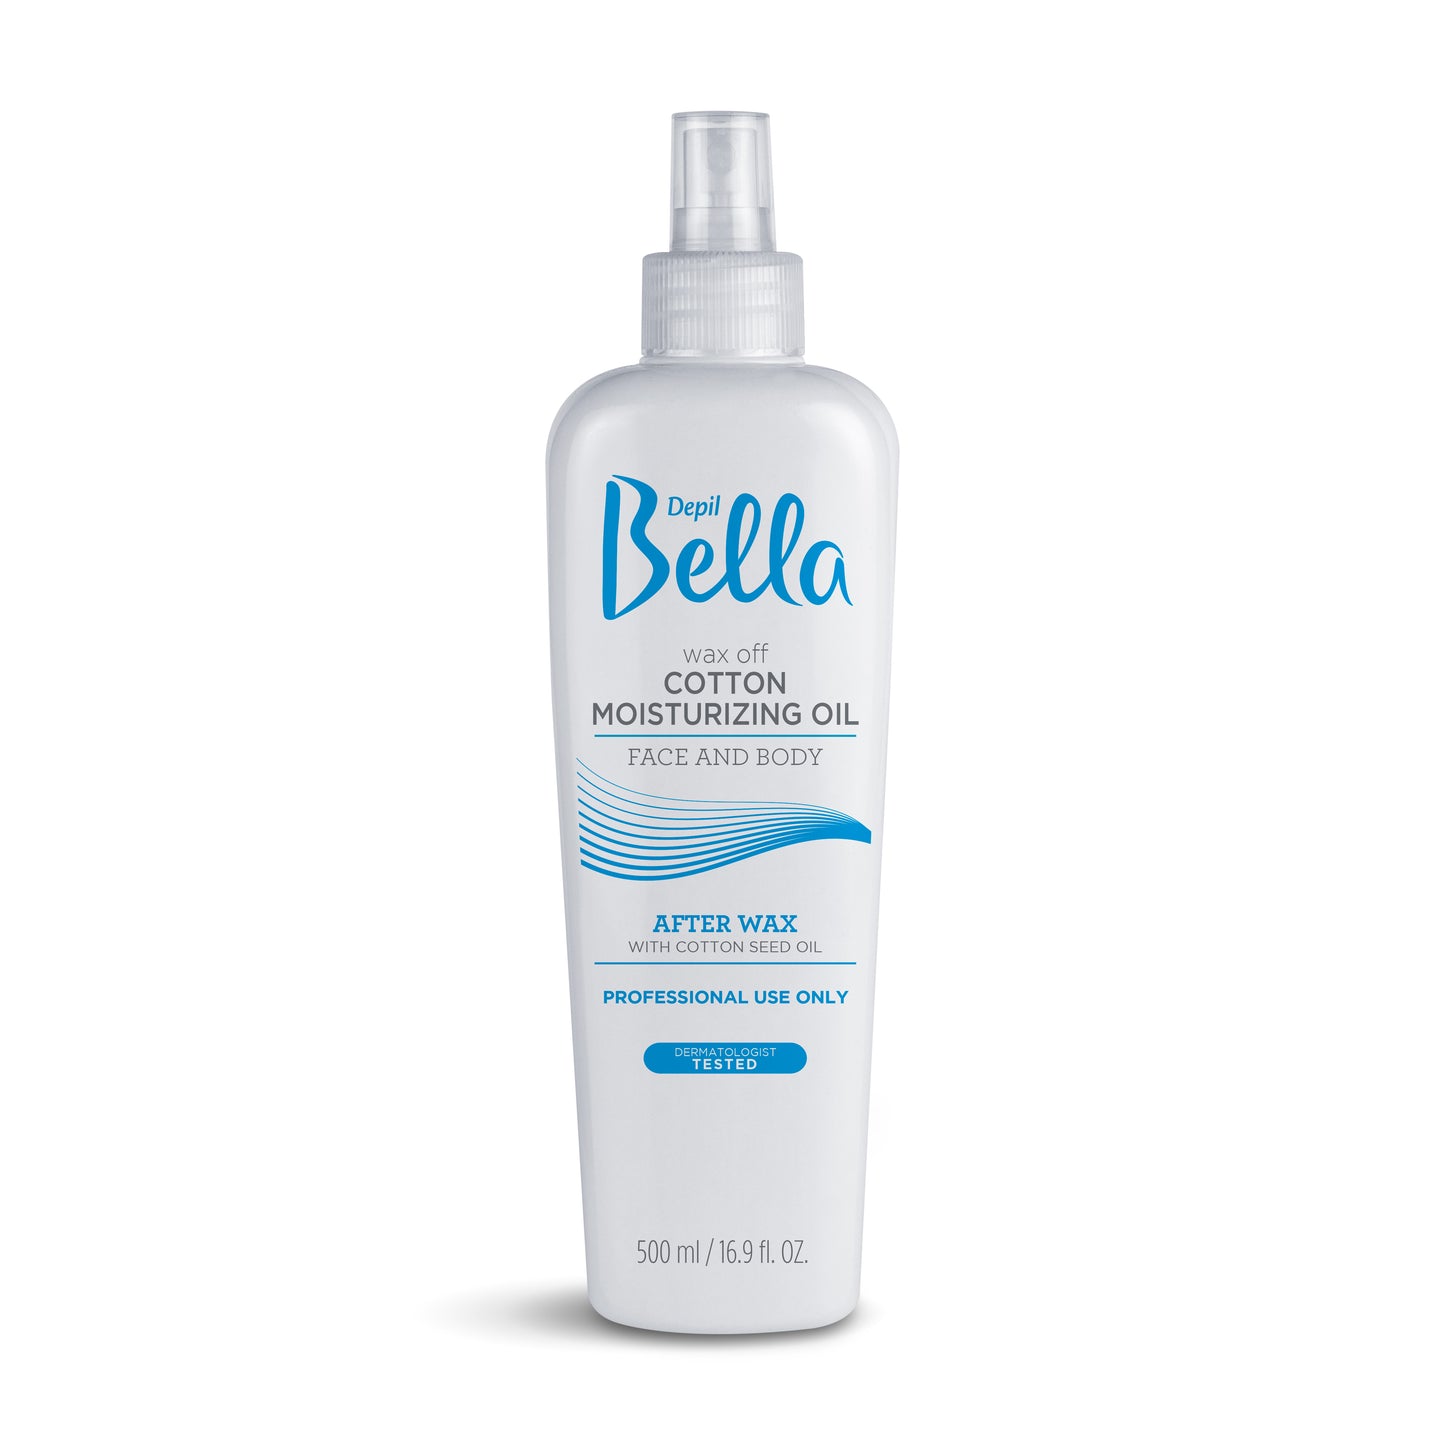 Kit Depil Bella, 1 unit Post Waxing Oil Remover and 1 unit Pre Waxing Astringent. - Depilcompany